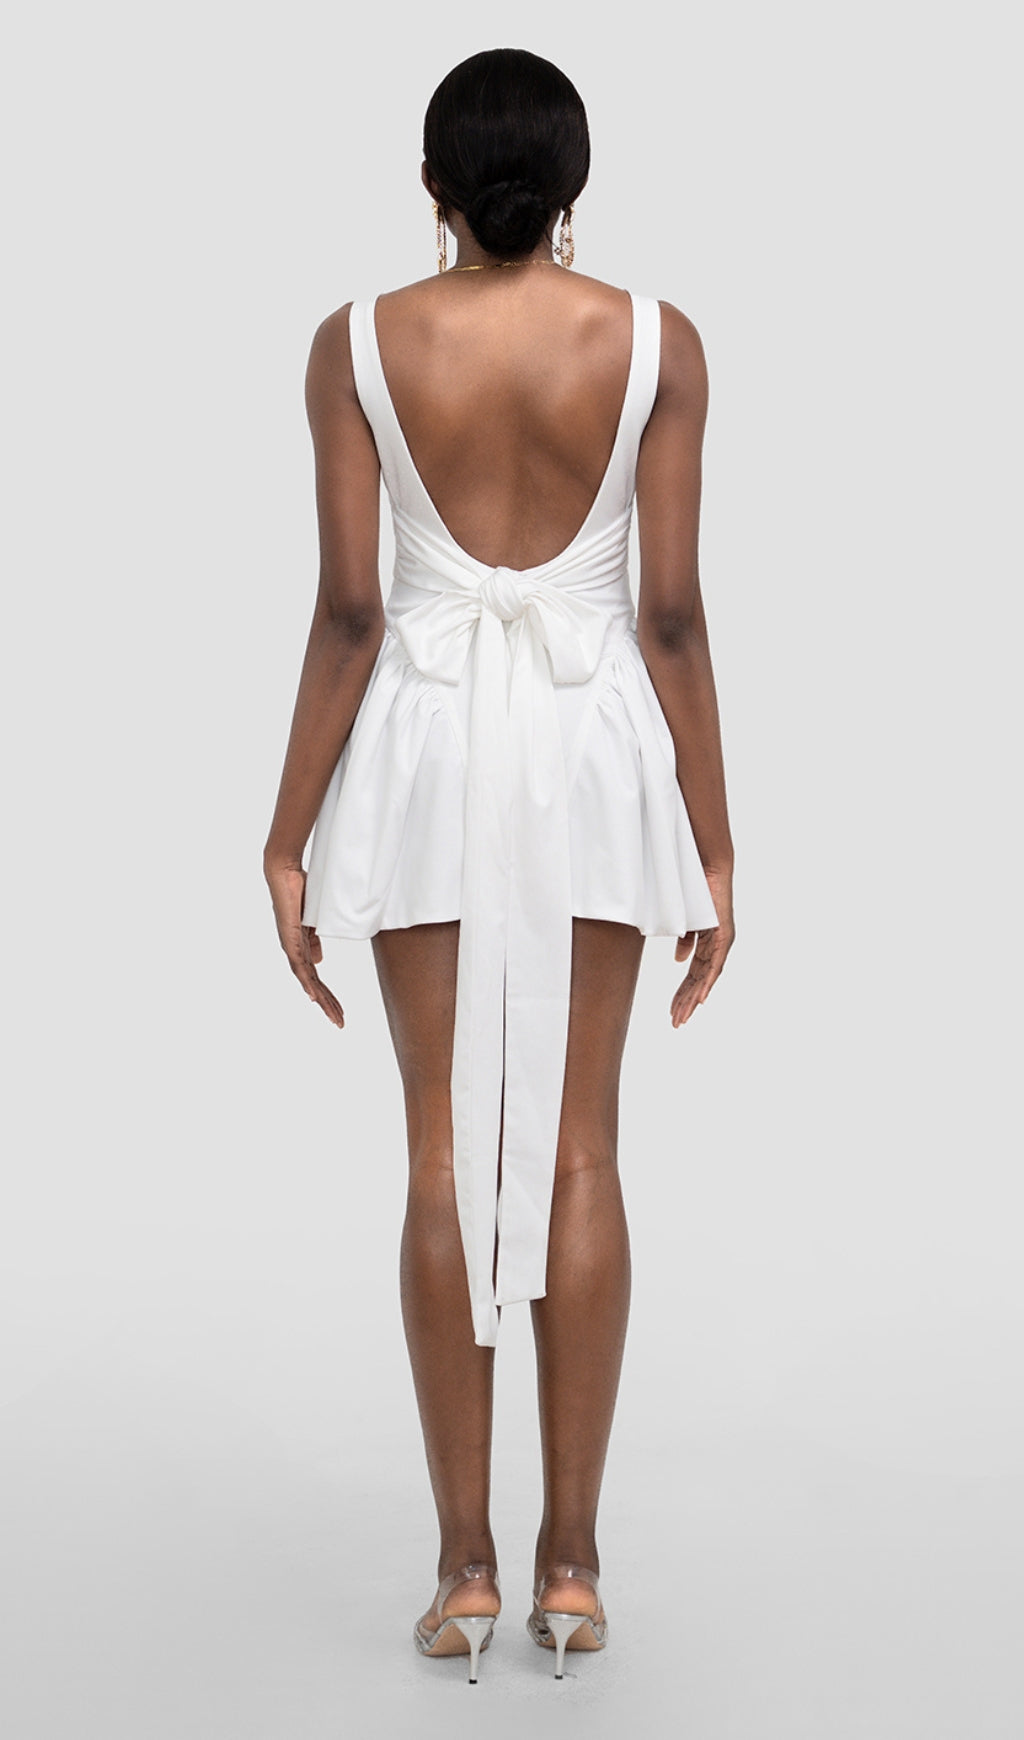 BACKLESS BOW MINI DRESS IN IVORY